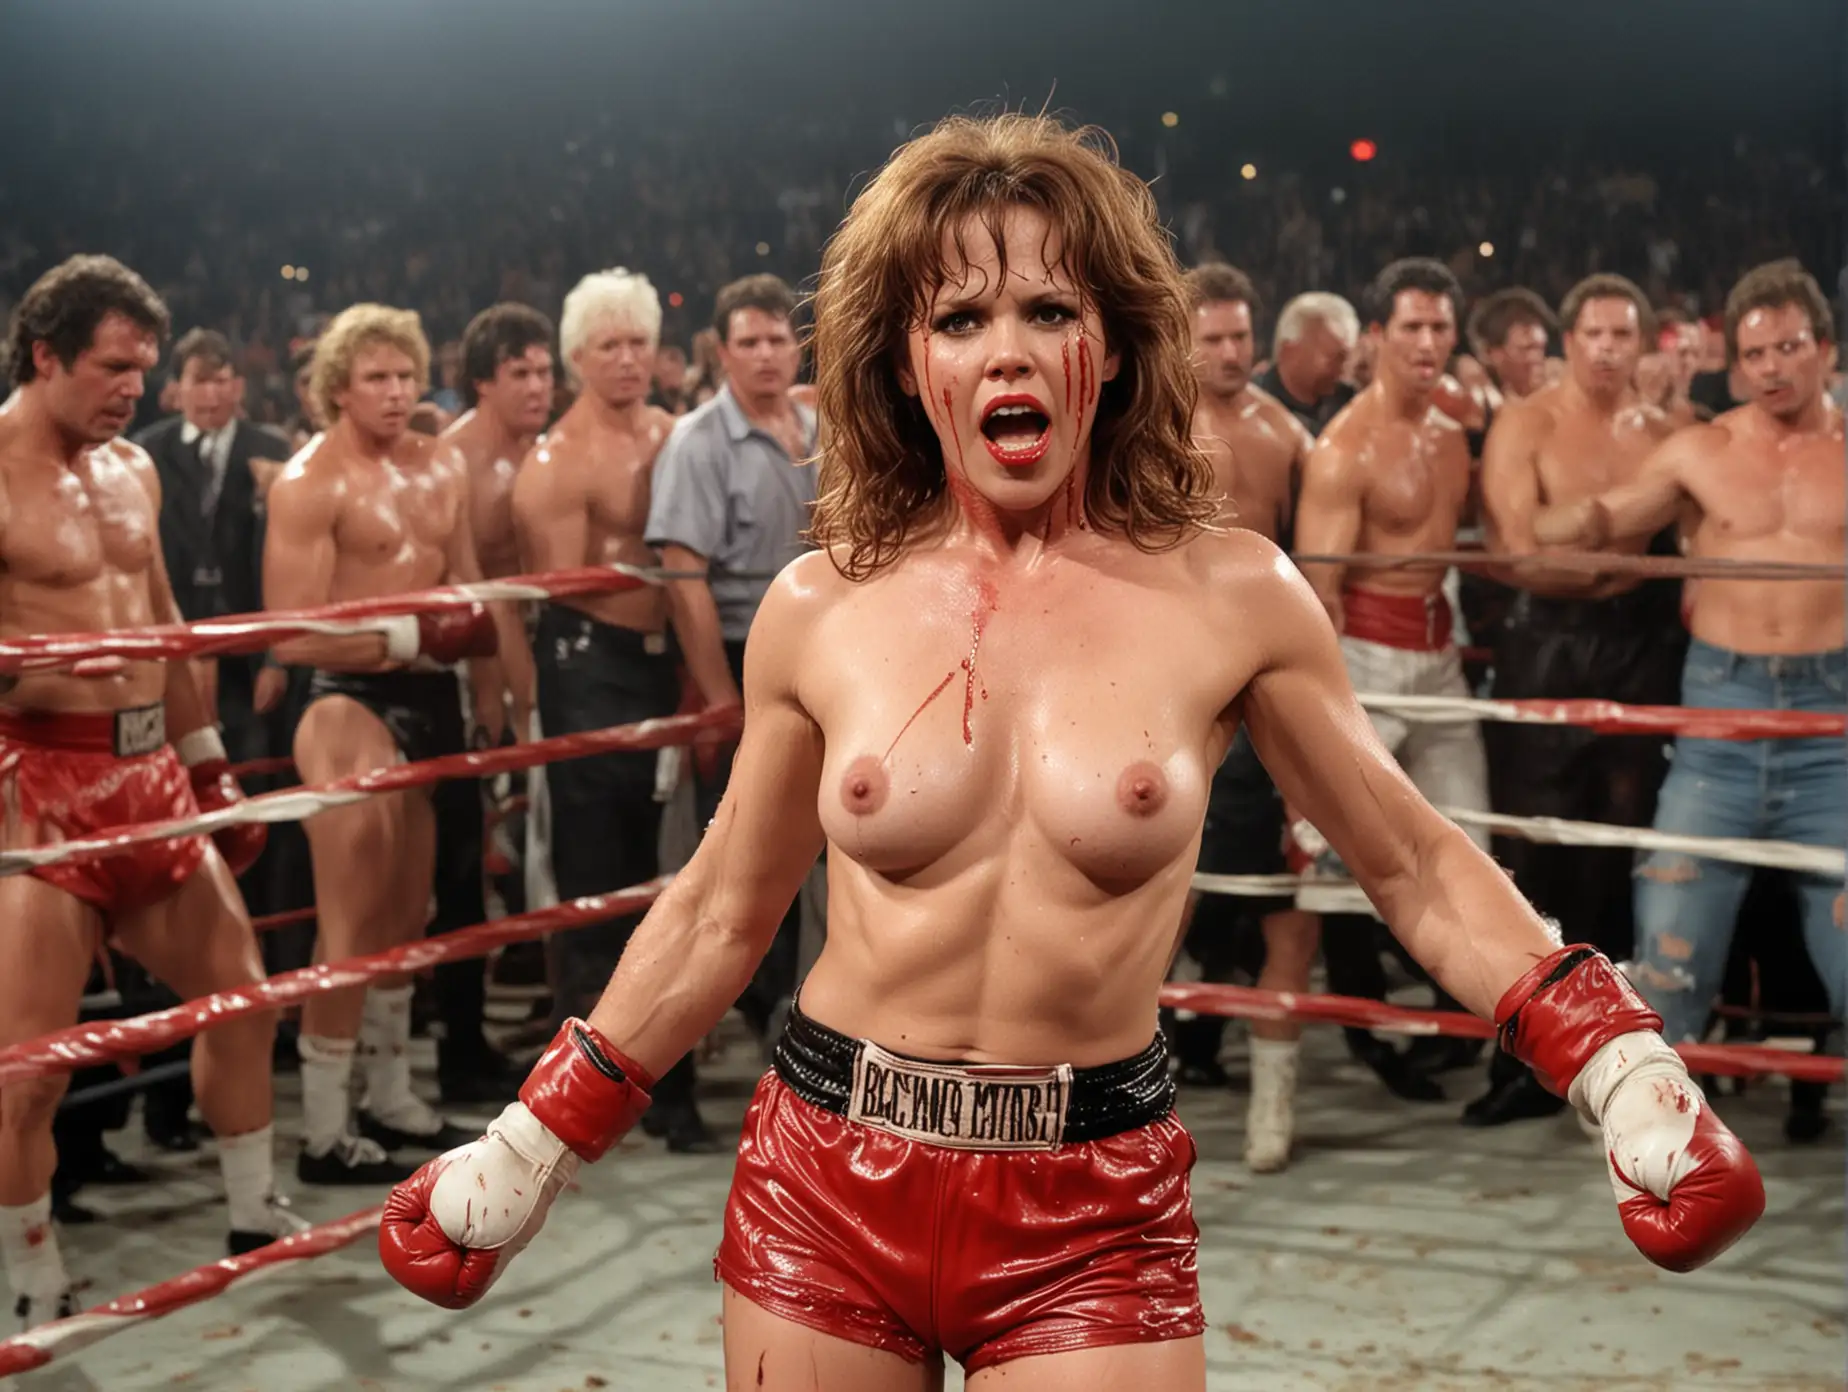  topless and extremely busty, muscular gorgeous actress Linda Blair with lots of makeup is fighting a man in boxing trunks is in a bloody boxing match killing a bloodied man in a large bright boxing ring with many men cheering her on